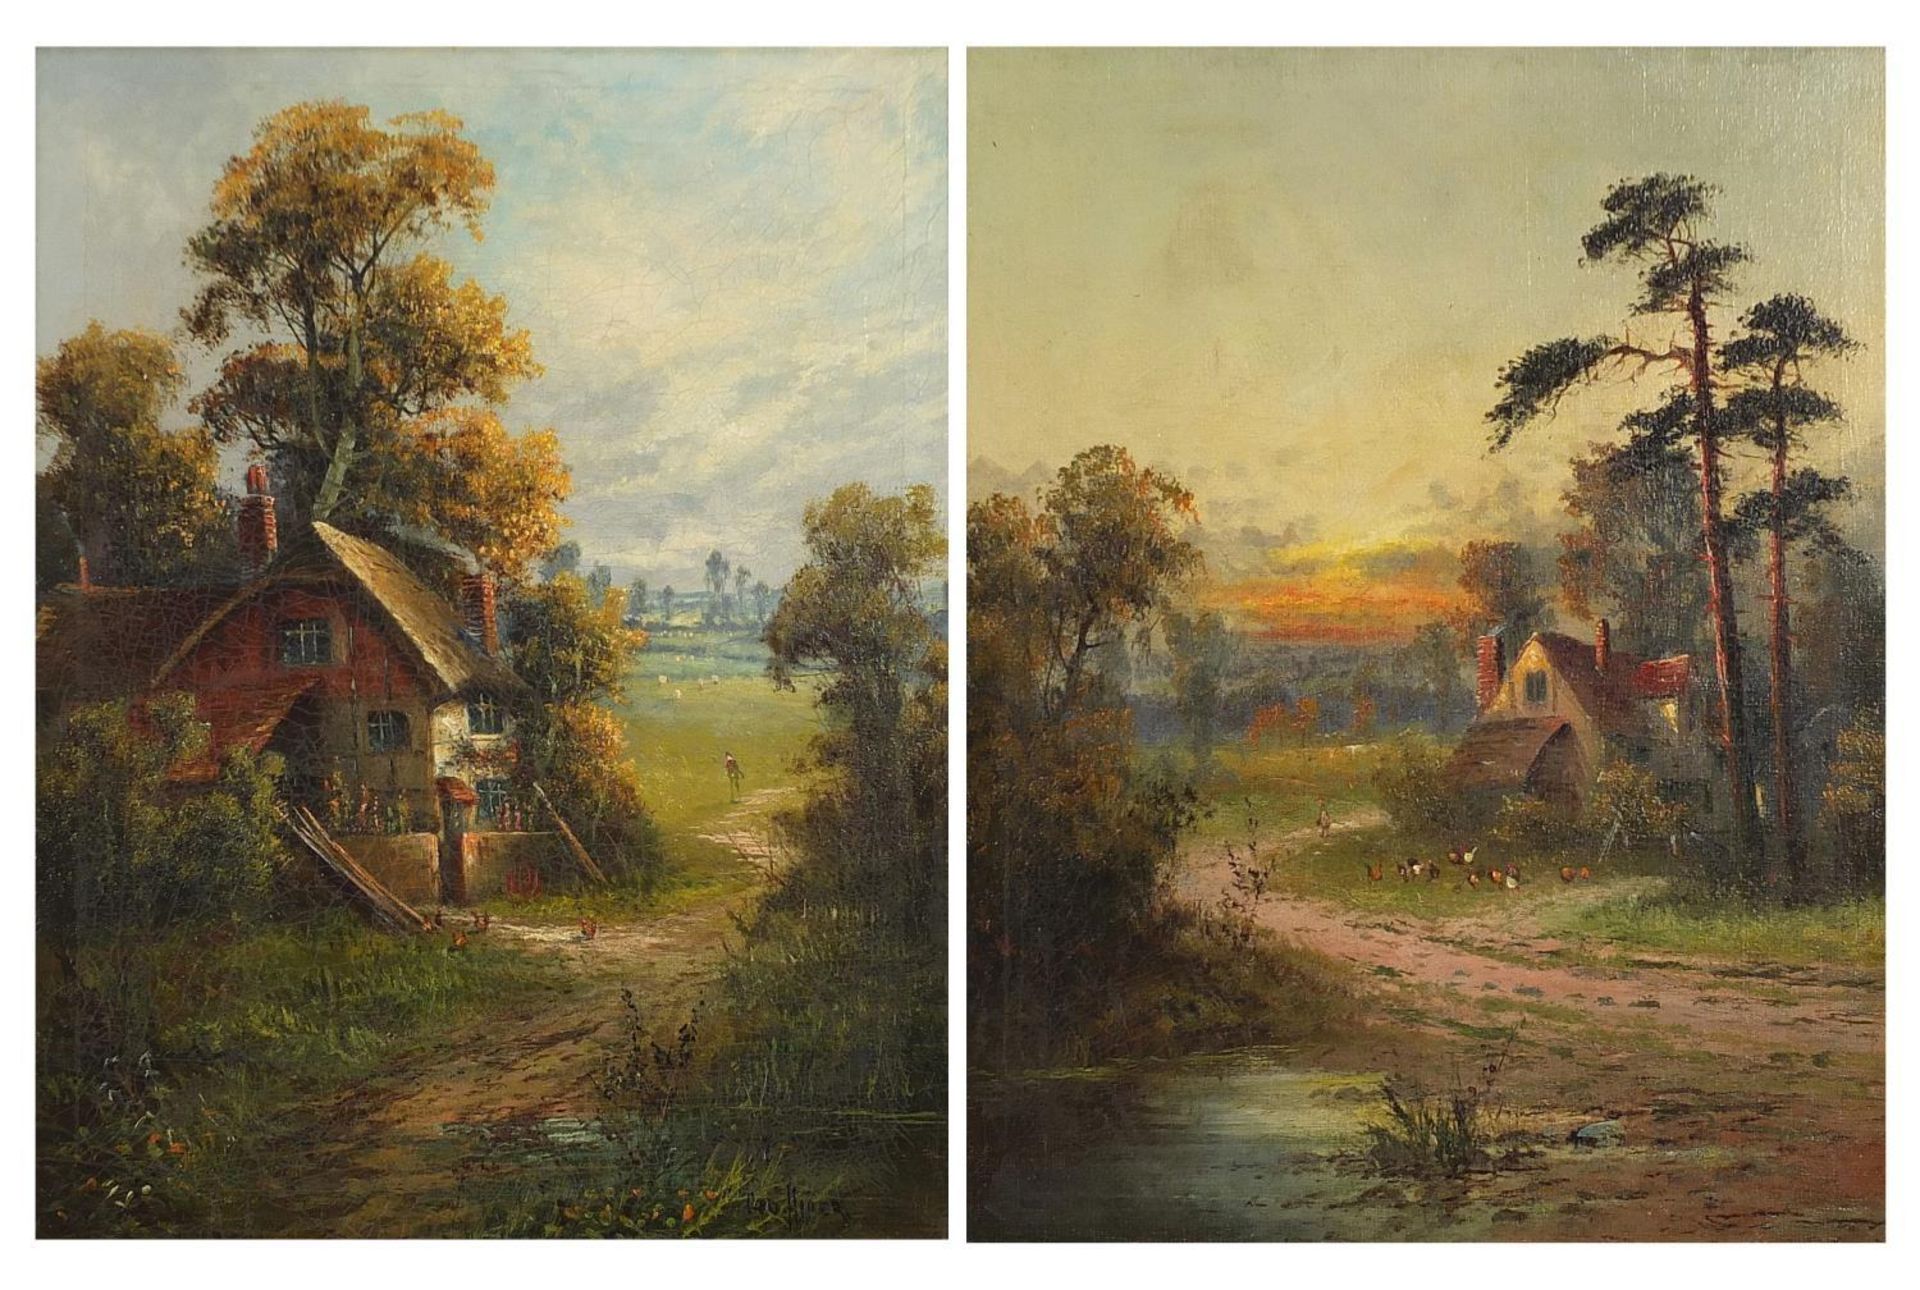 George Hider - Landscapes with cottages, pair of 19th century oil on canvasses, framed, 44cm x